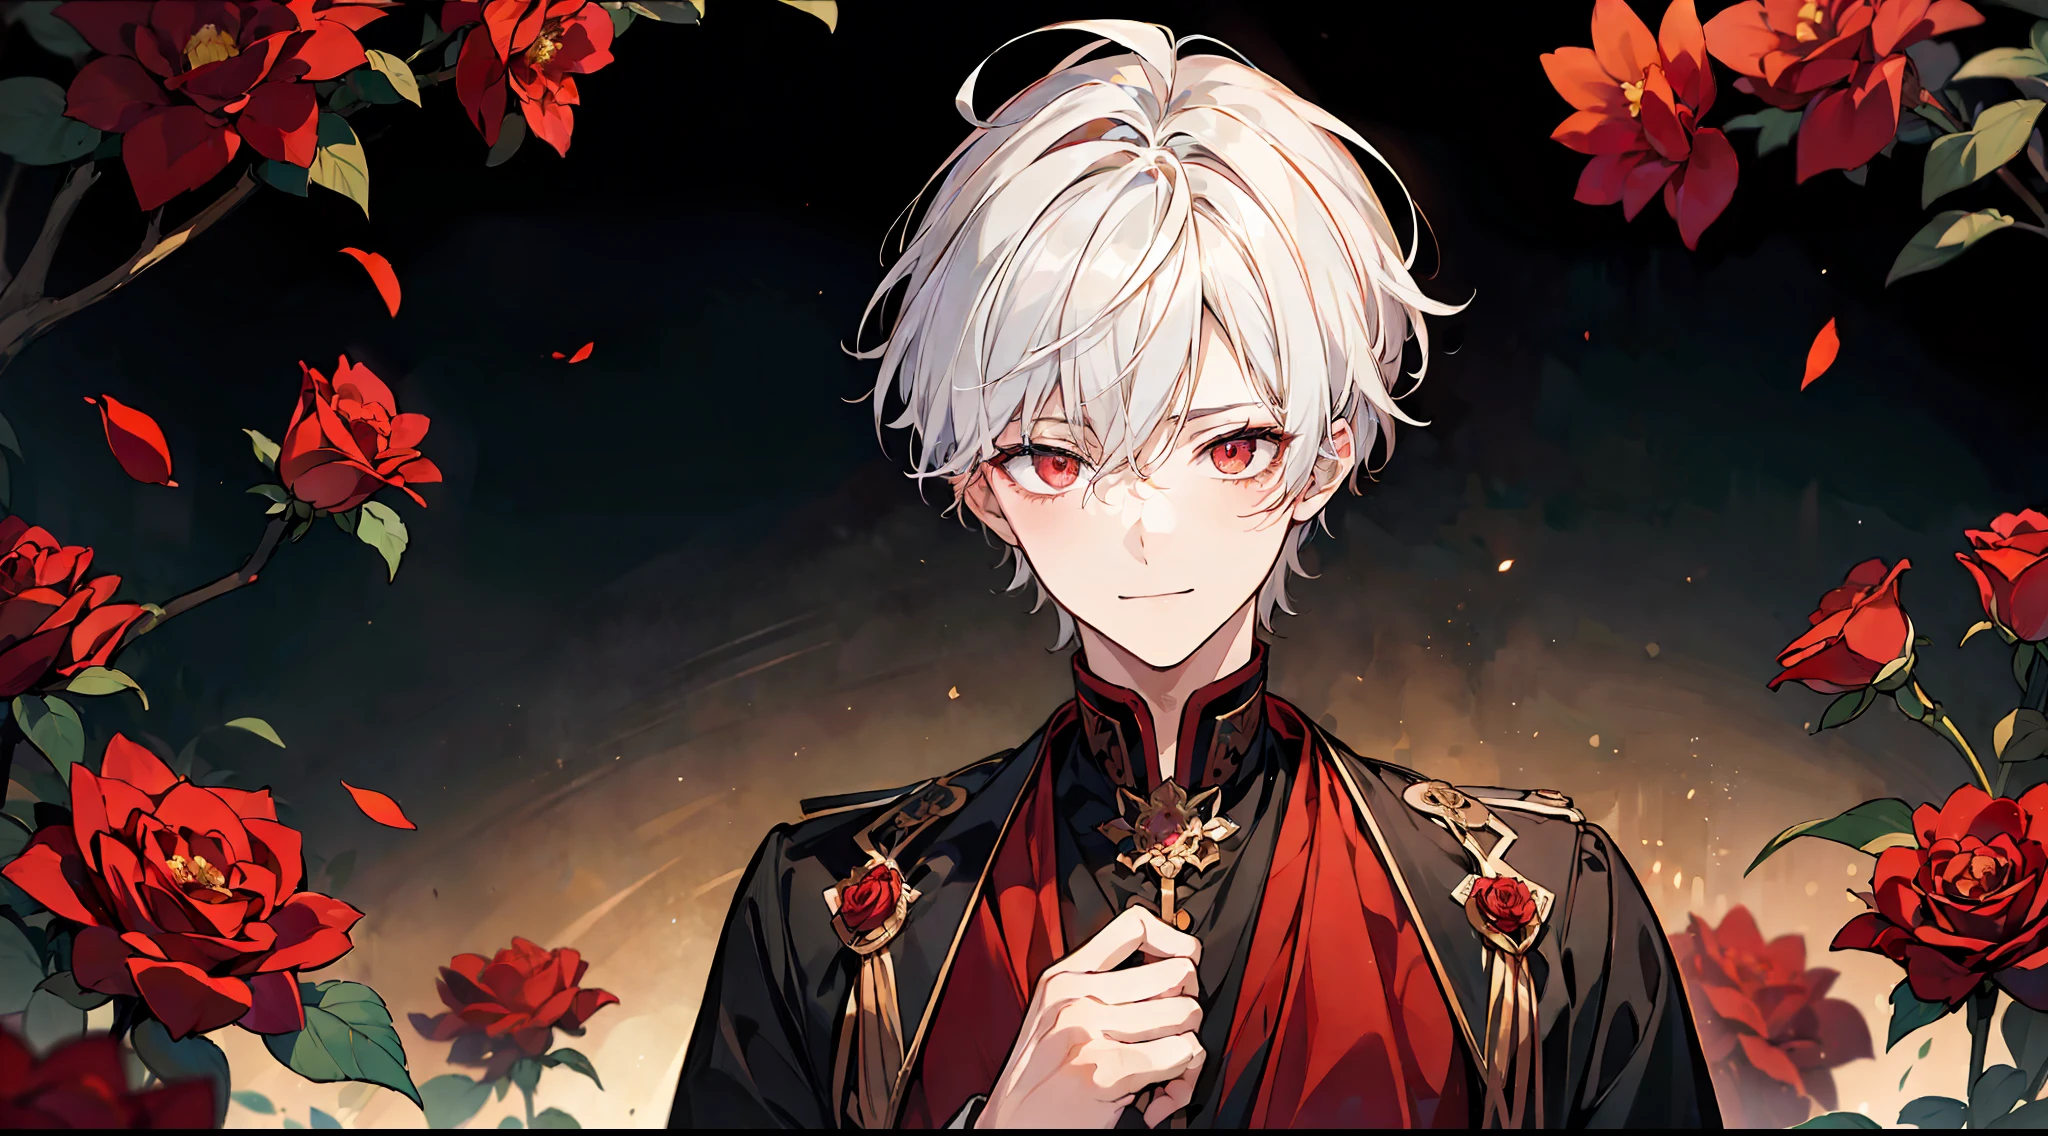 ((masterpiece)),(((best quality))), (high-quality, breathtaking),(expressive eyes, perfect face), short, young boy, short white hair, red eyes, smiling, black panties, shine, glow, red roses, bedroom, ai kotoba iv pose, up close, portrait, bright and colorful background, flowers